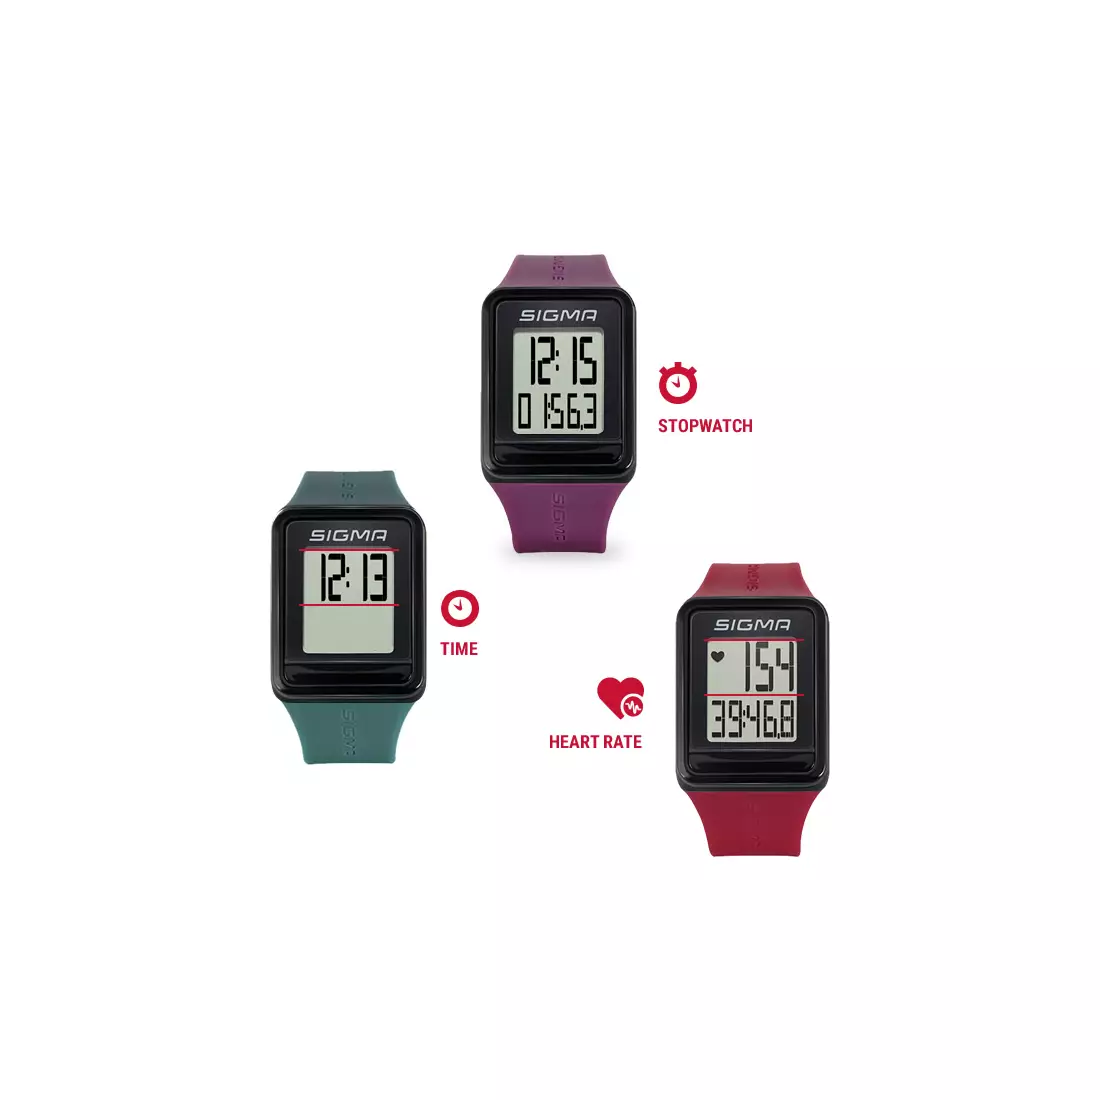 SIGMA iD.GO red heart rate monitor